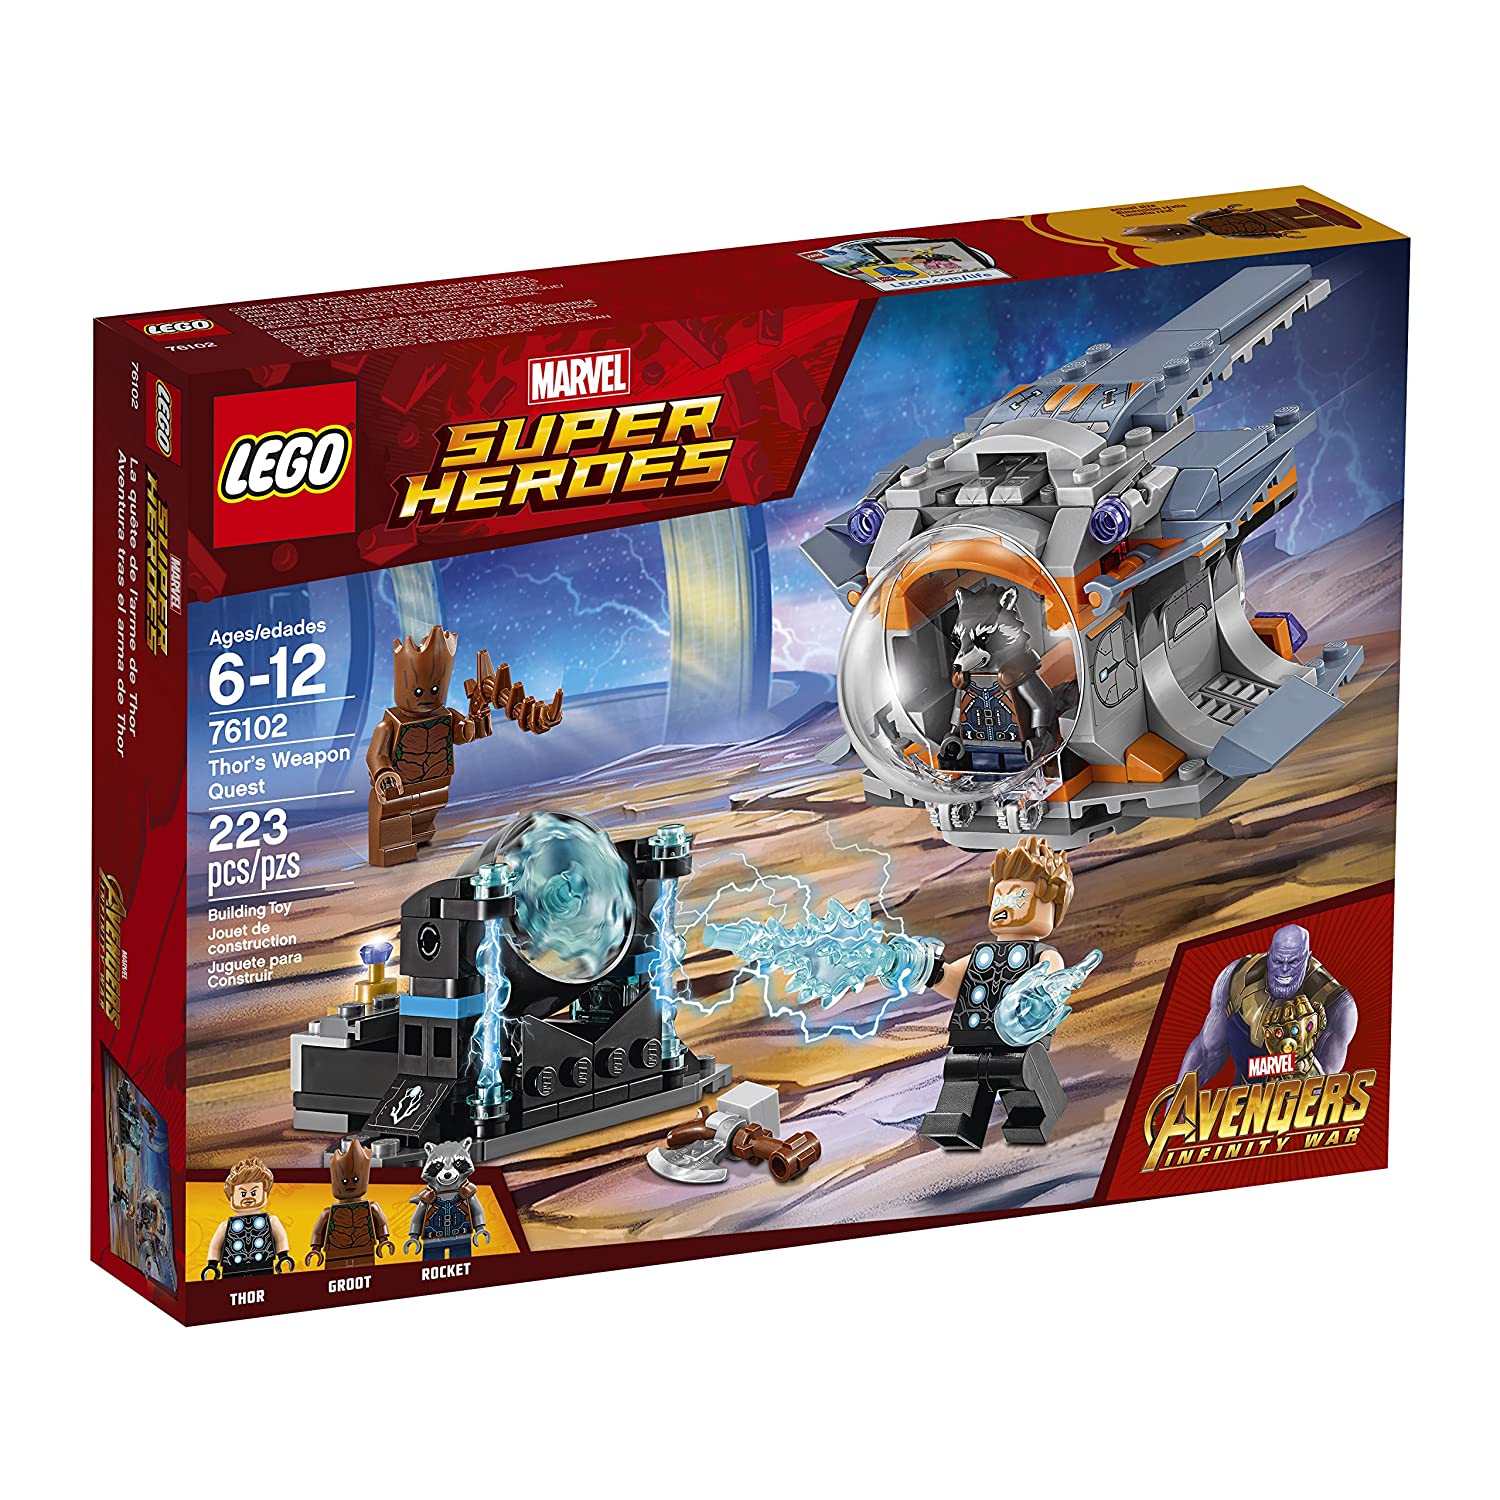 Top 9 Best LEGO Avengers Infinity War Sets Reviews in 2022 3